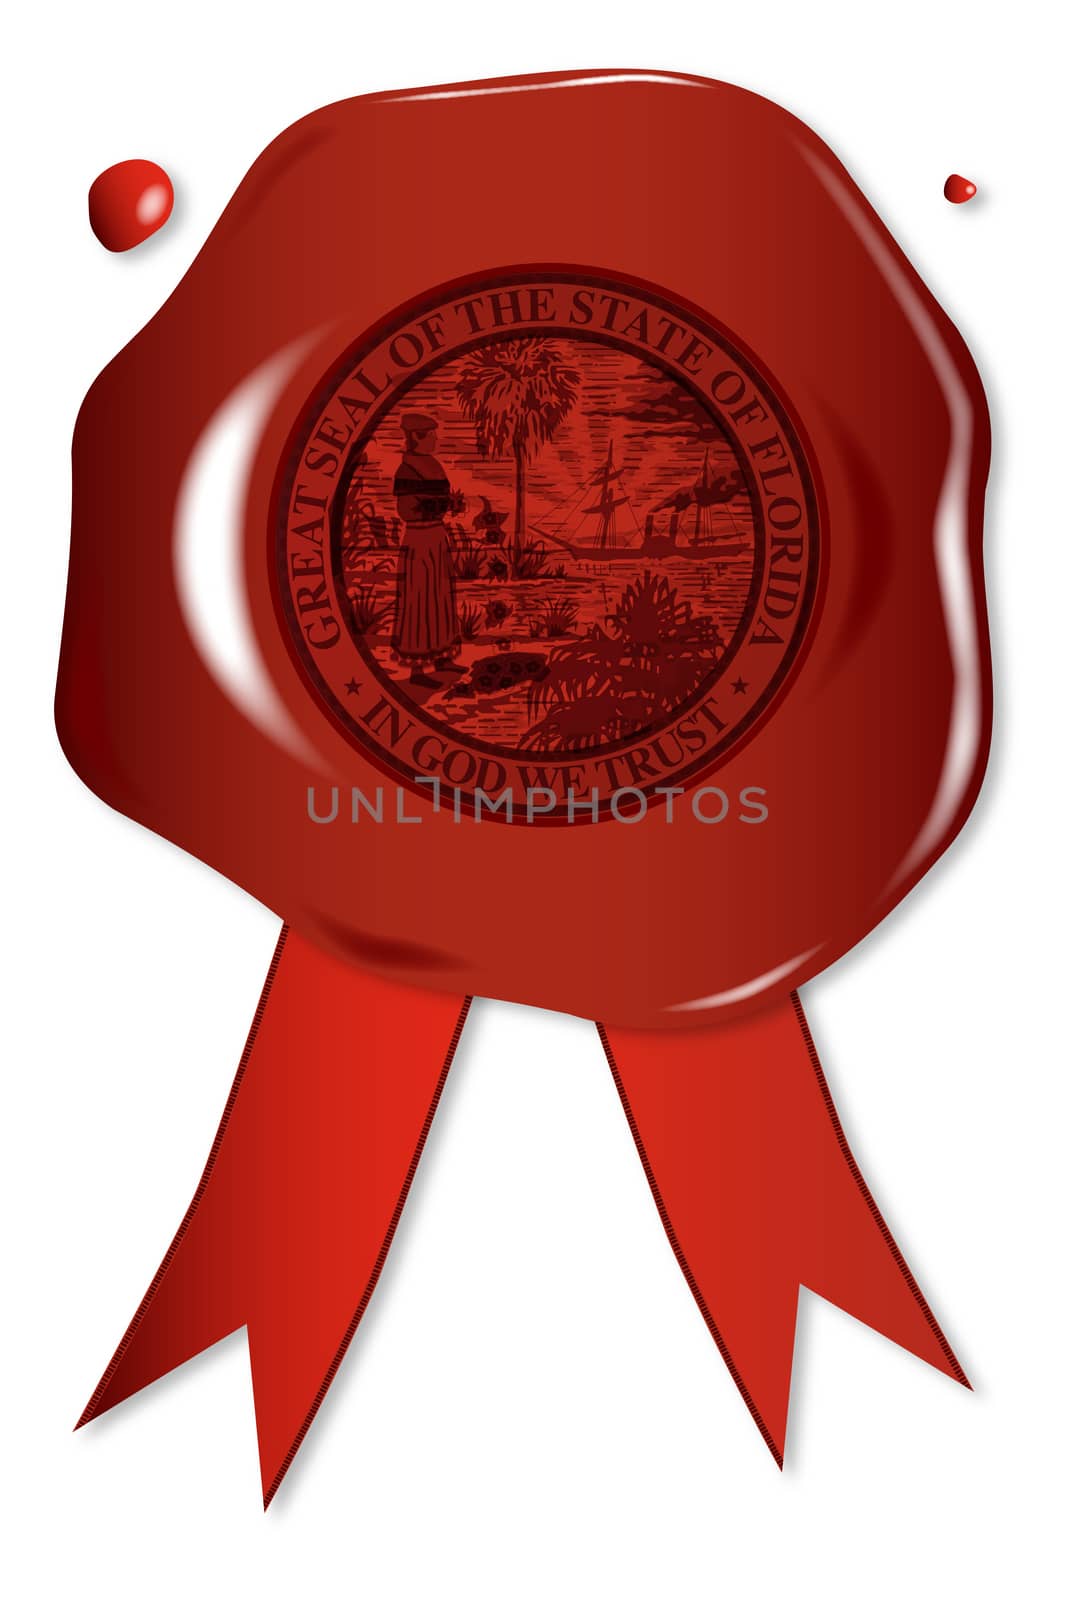 A wax seal with a the state seal of Florida